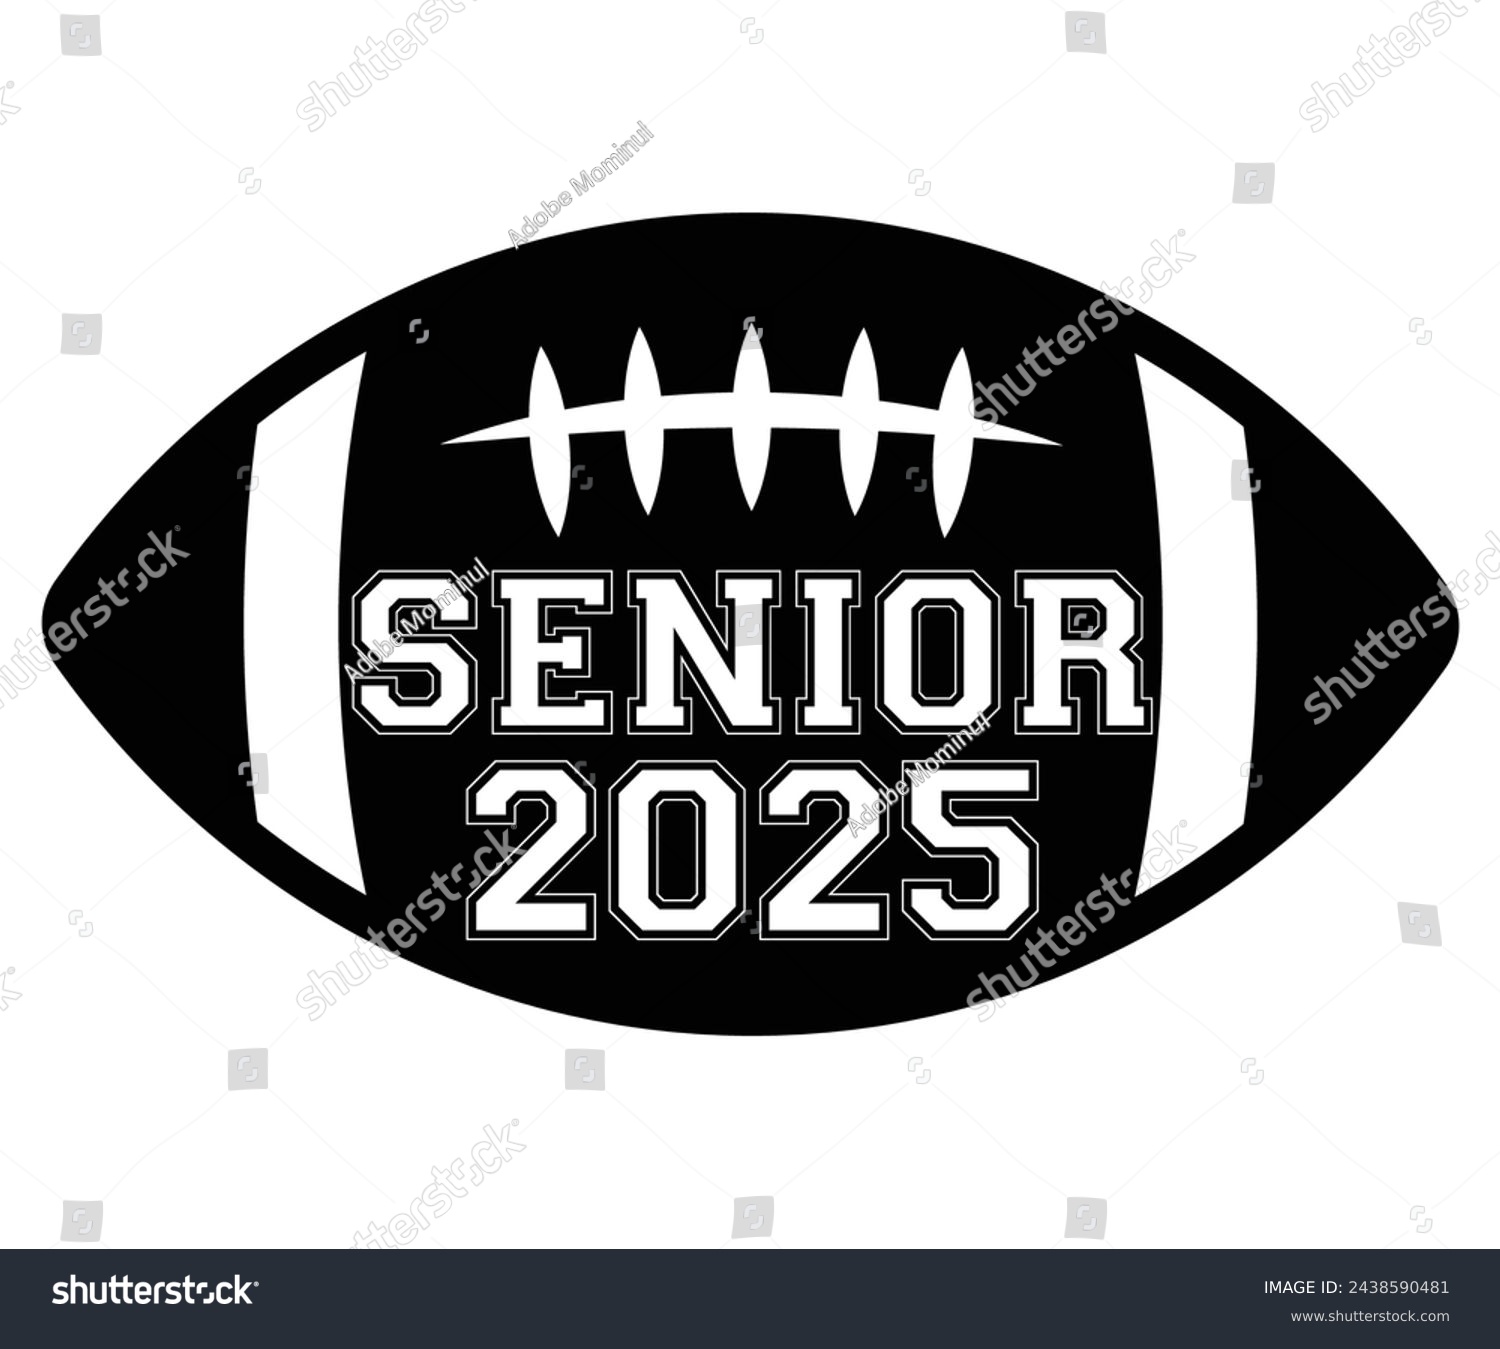 SVG of 2025 Senior Football,Football Svg,Football Player Svg,Game Day Shirt,Football Quotes Svg,American Football Svg,Soccer Svg,Cut File,Commercial use svg